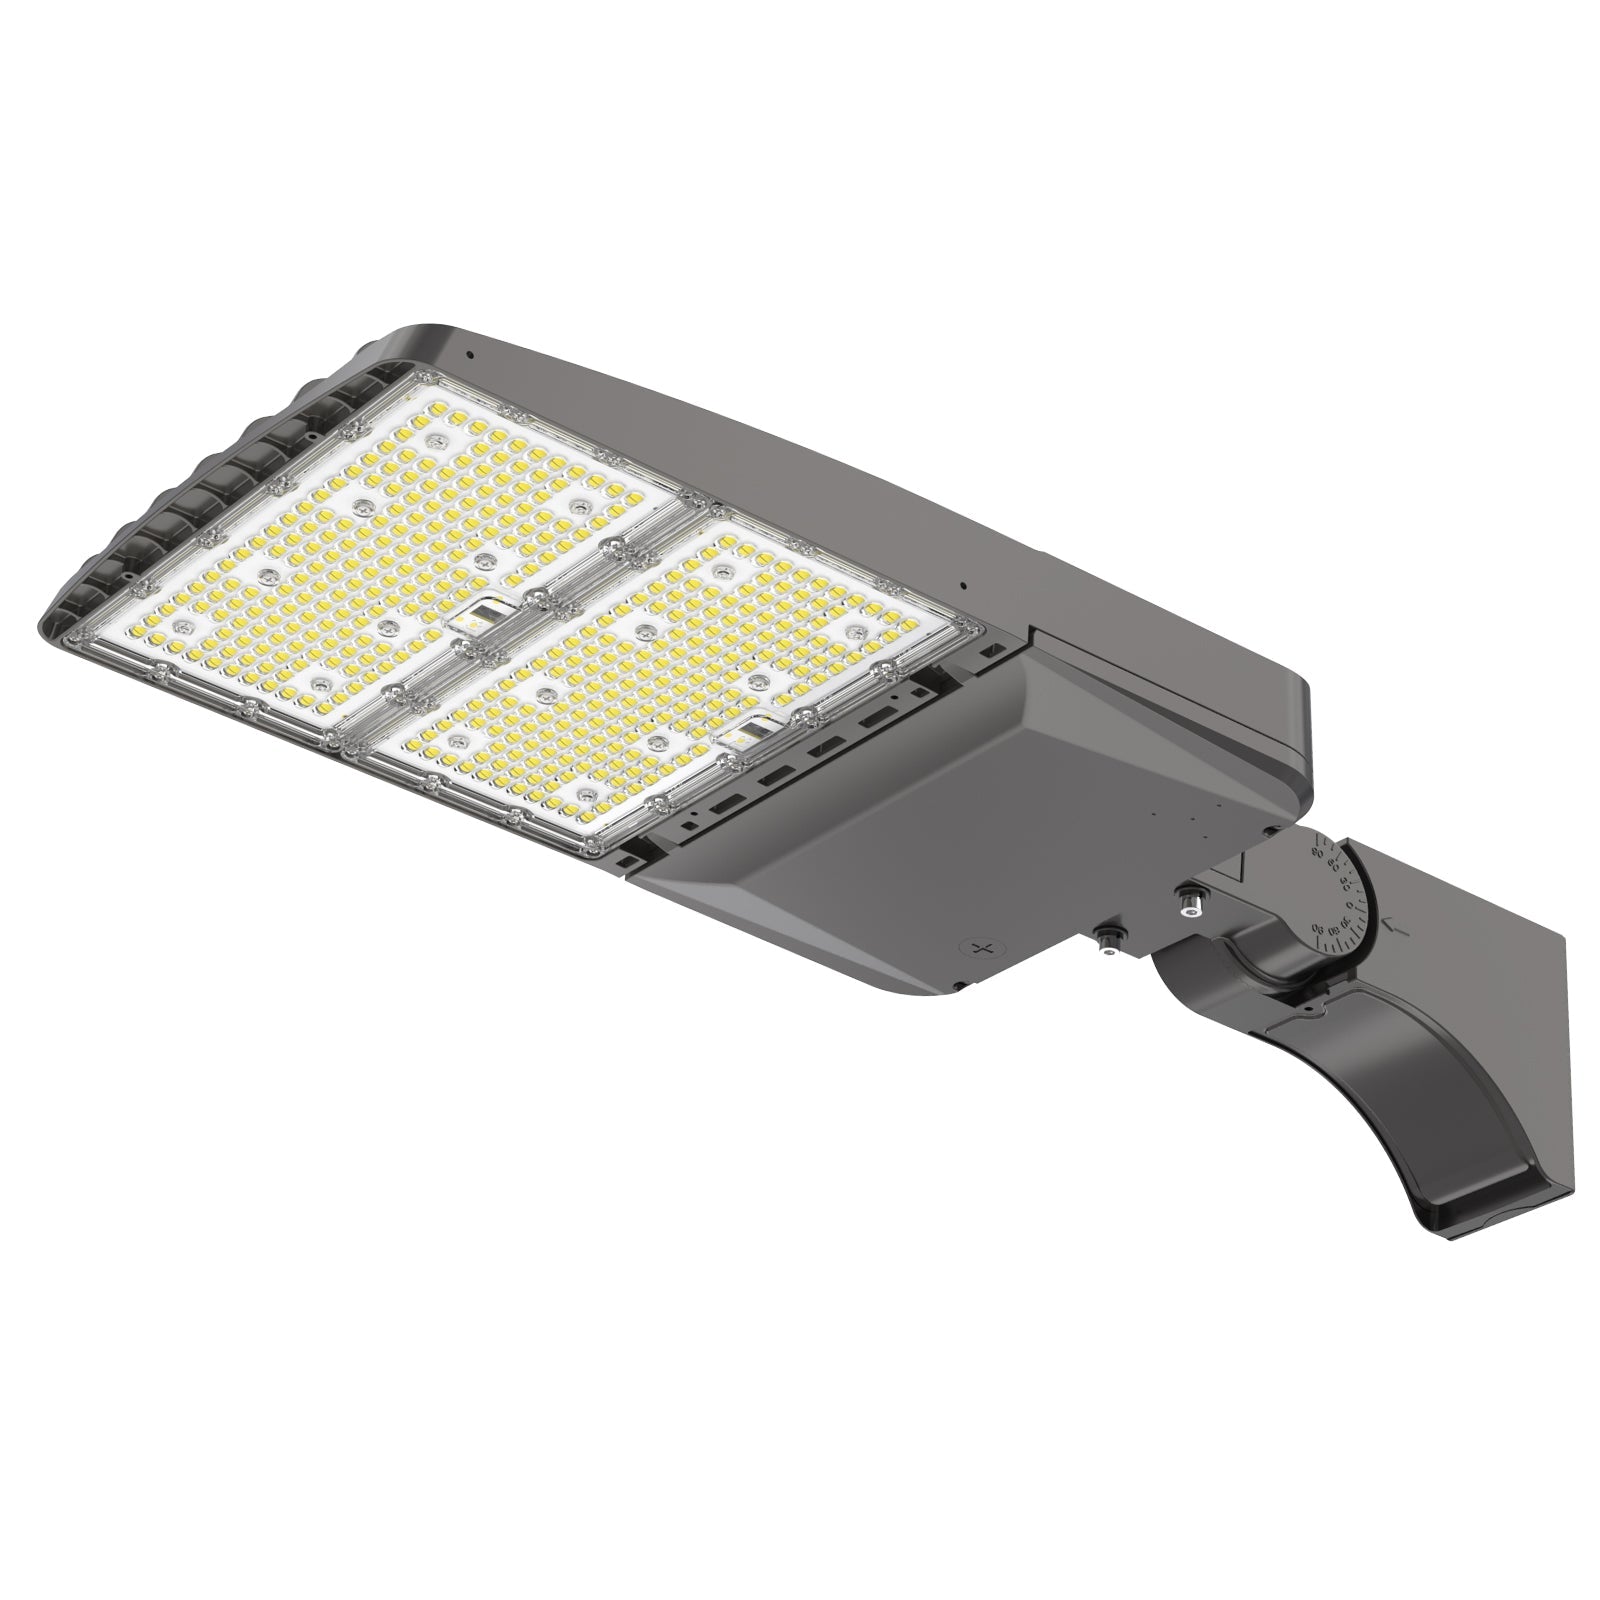 Commercial XALH Series Area Light - Without Shortcap, AC 277V-480V, 5000K, 0-10V Dimmable